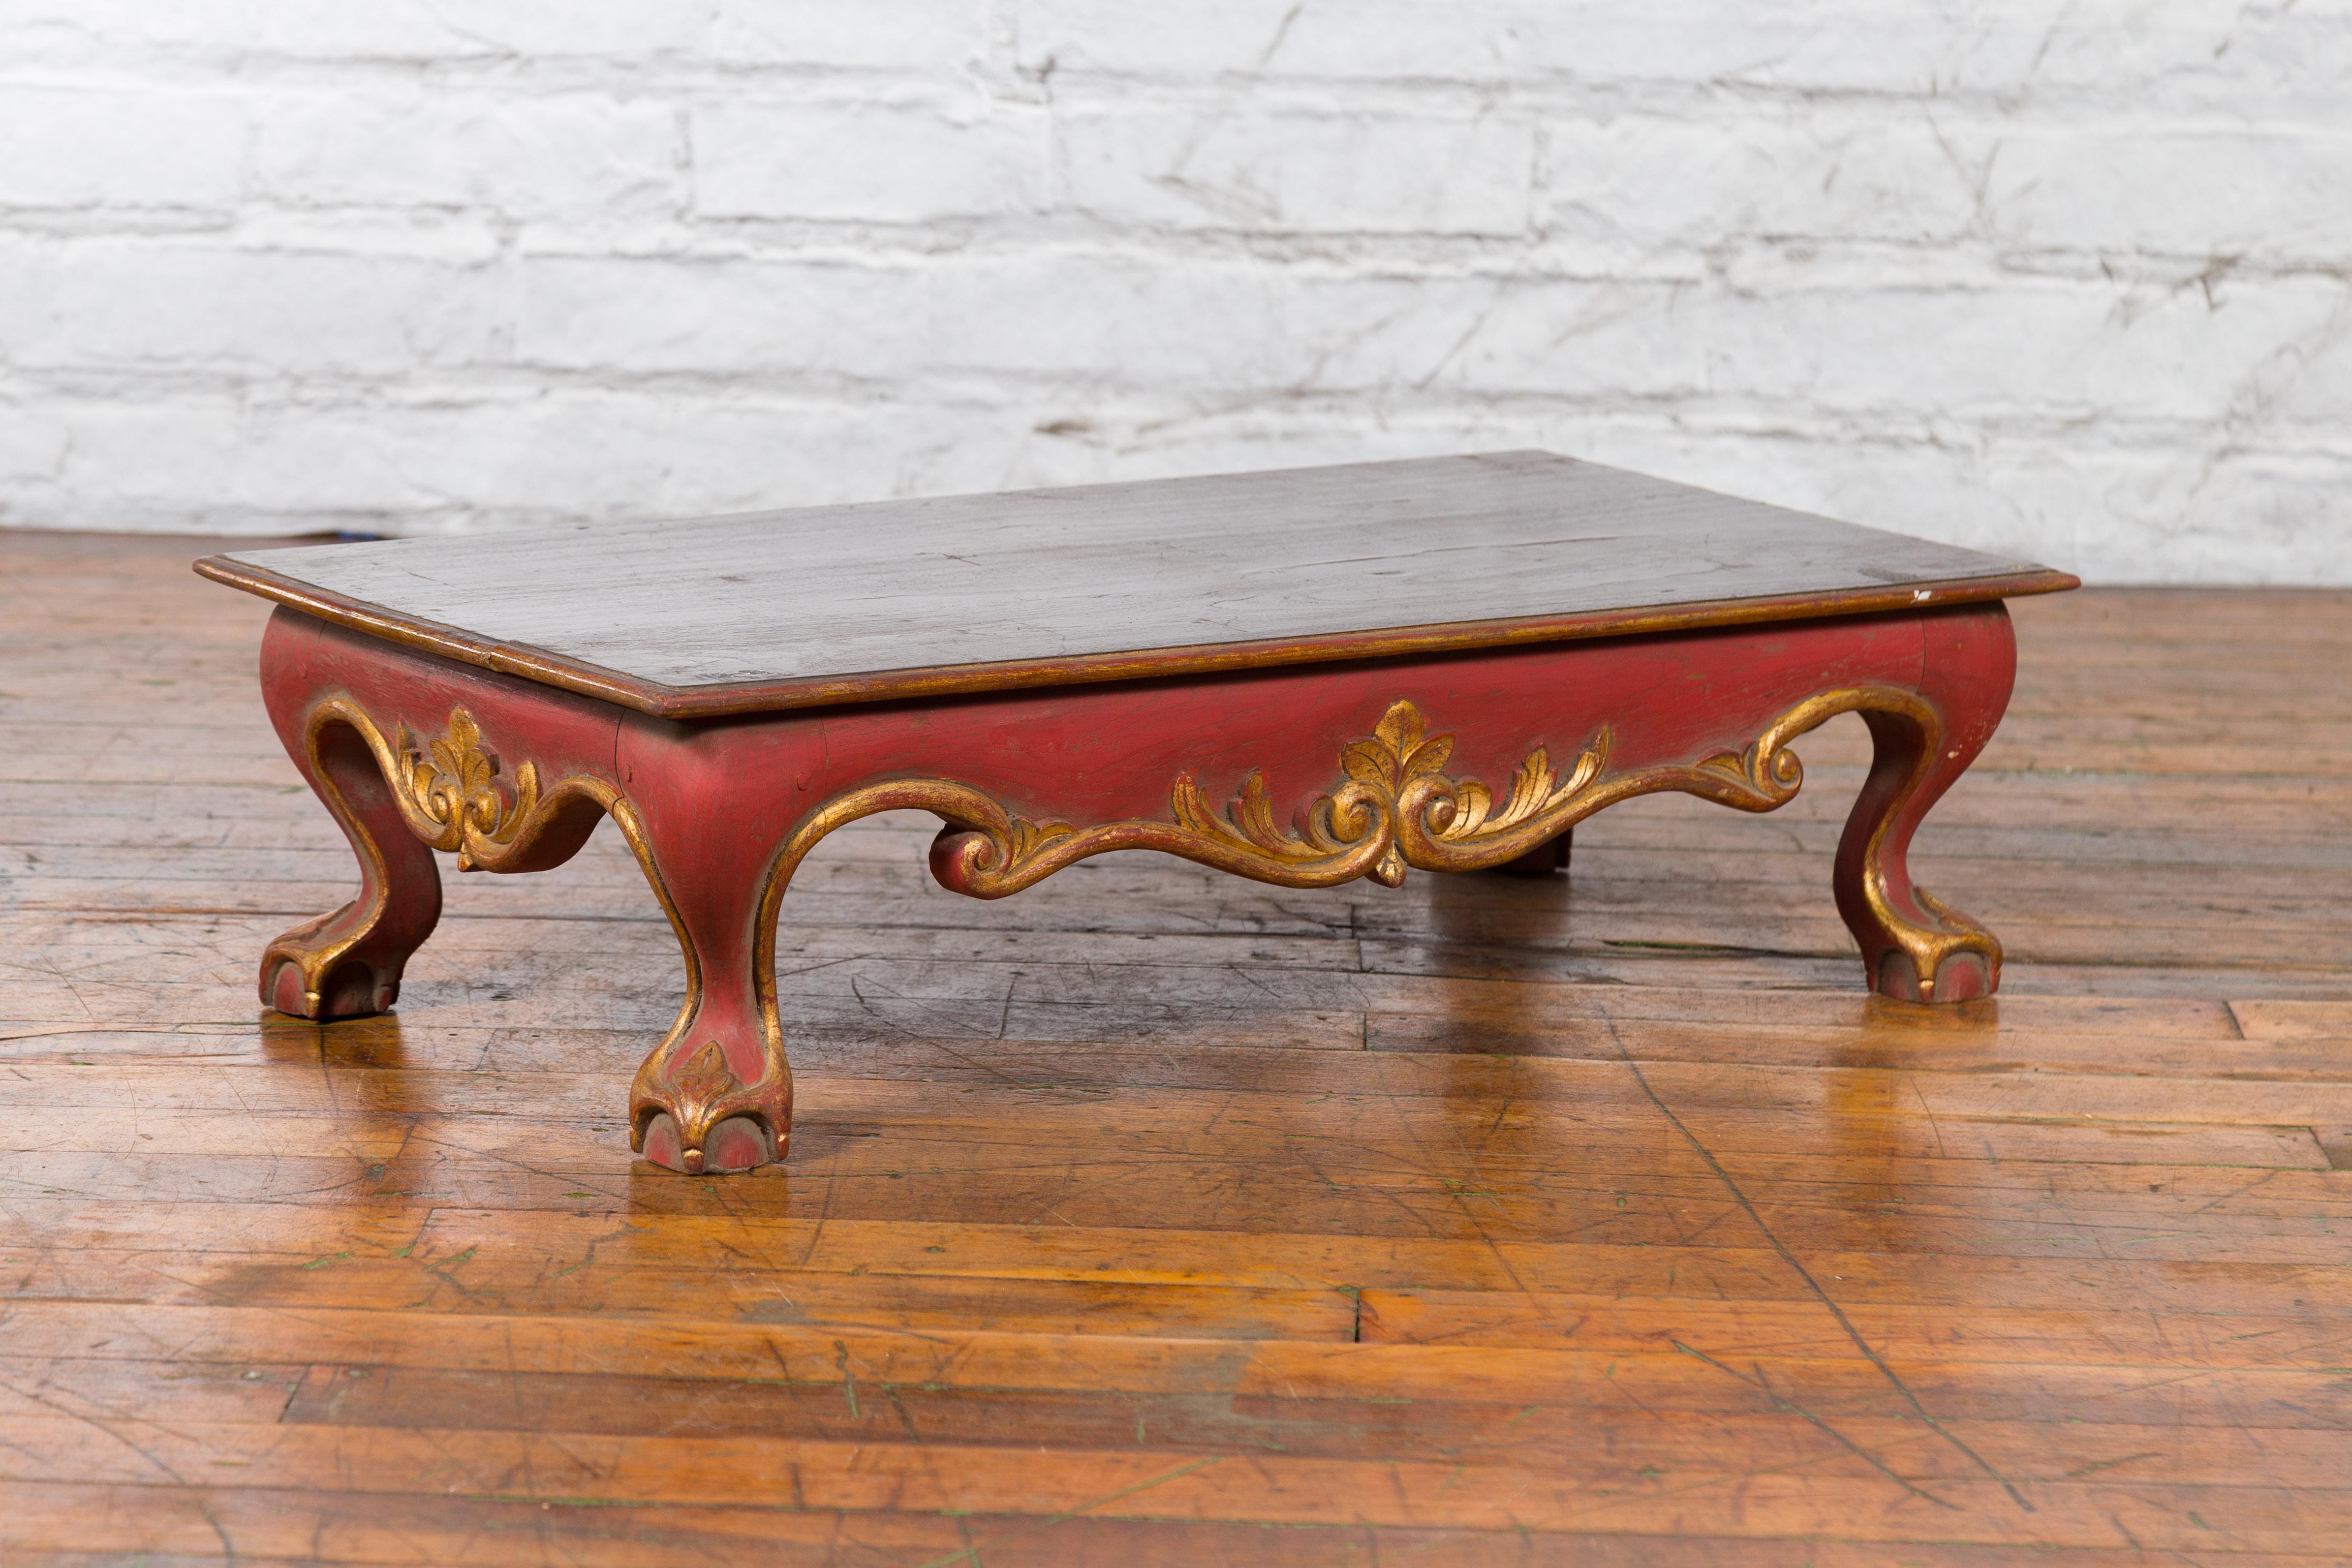 Indonesian Vintage Rococo Style Red and Gold Low Table with Ball-and-claw Feet In Good Condition For Sale In Yonkers, NY